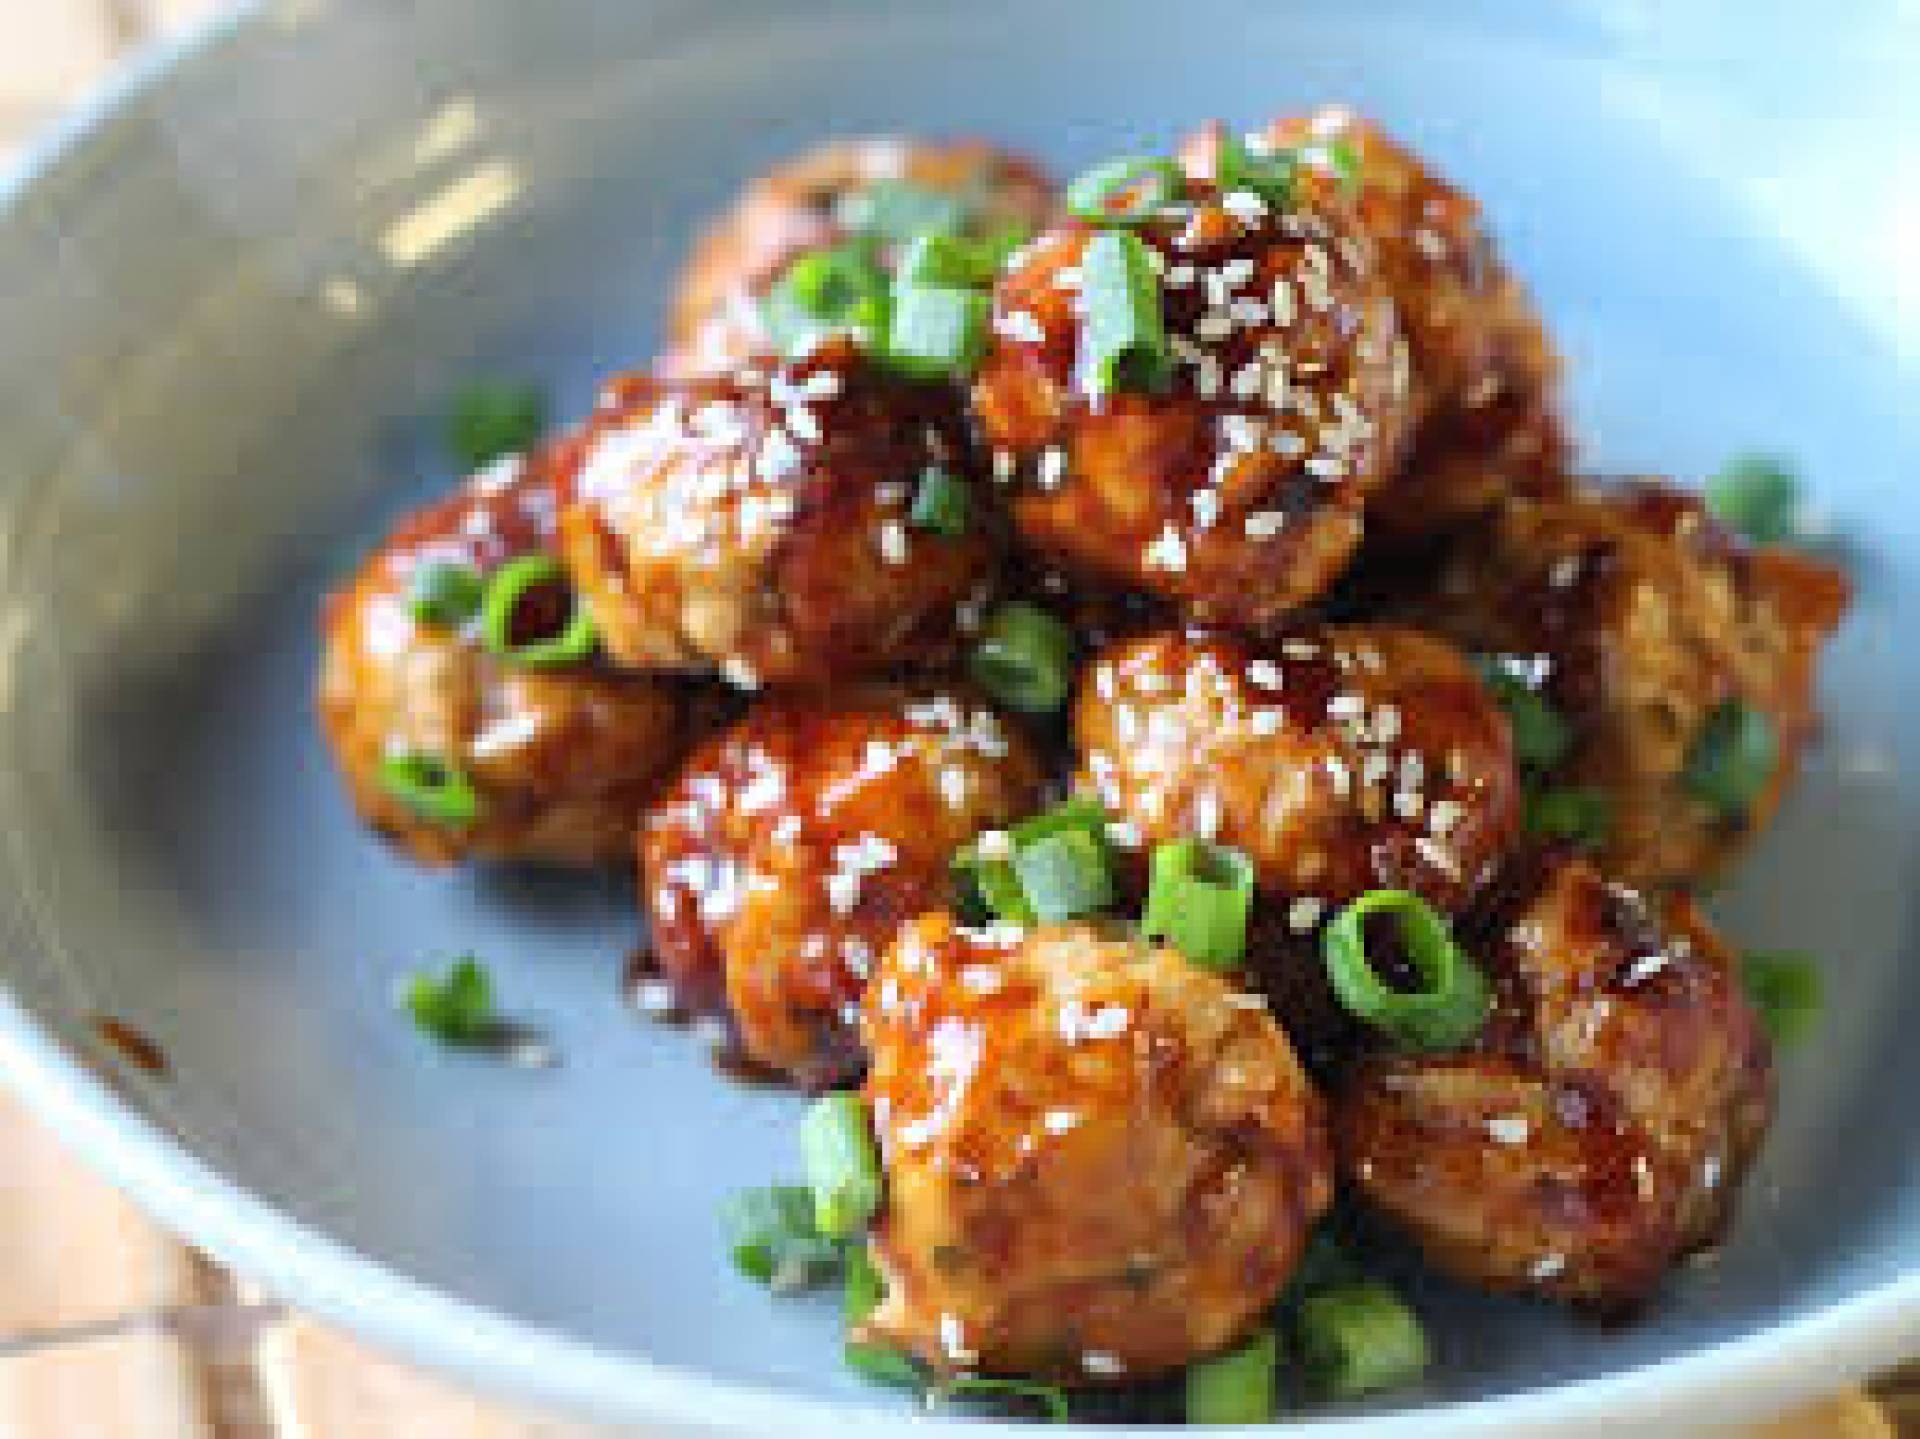 Teriyaki Chicken Meatballs with White Rice and Ginger Carrots